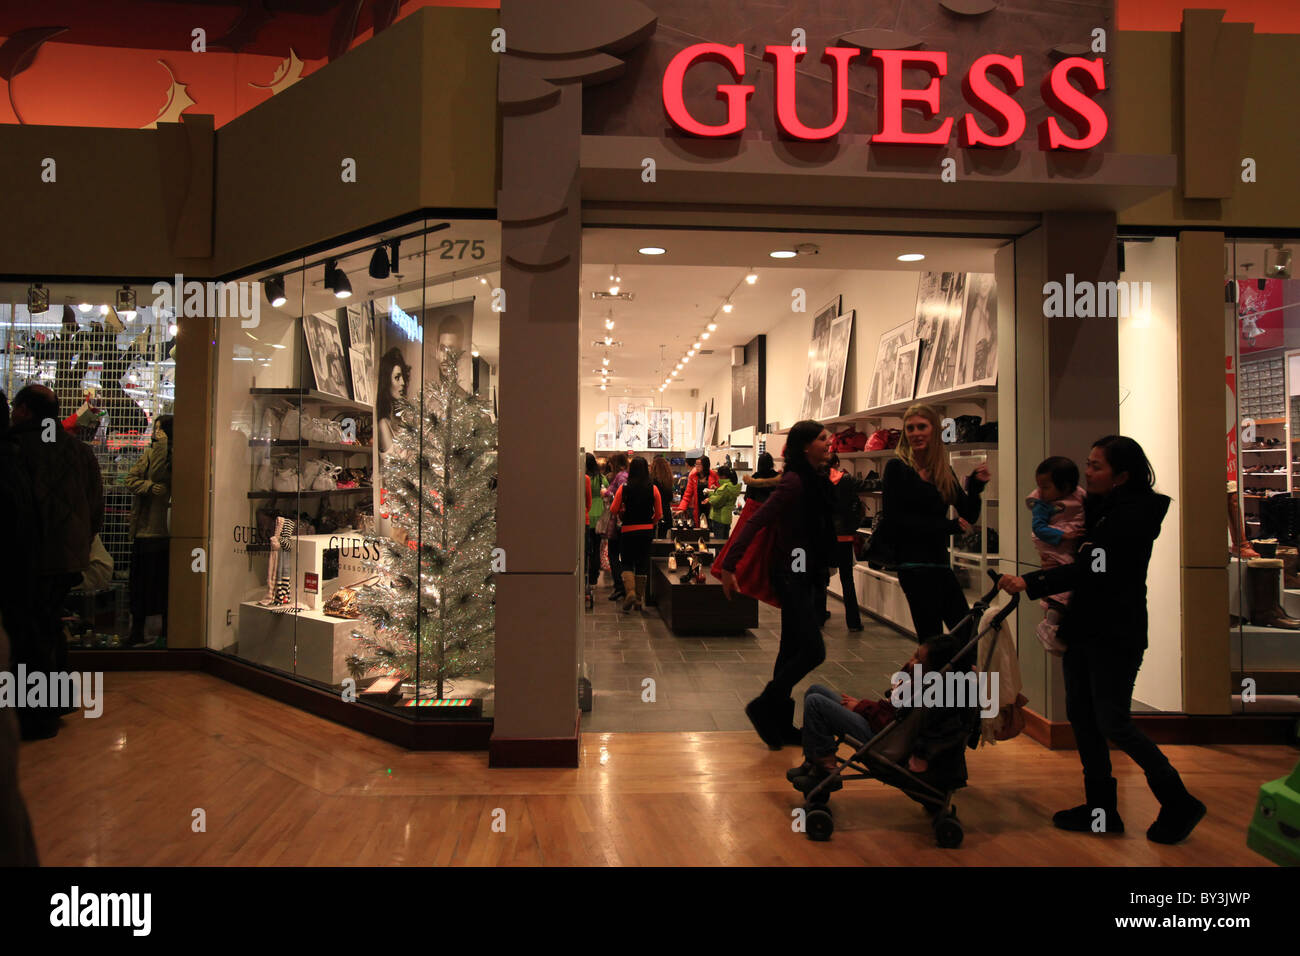 Guess clothing outlet store in Vaughan Mills Mall in ...